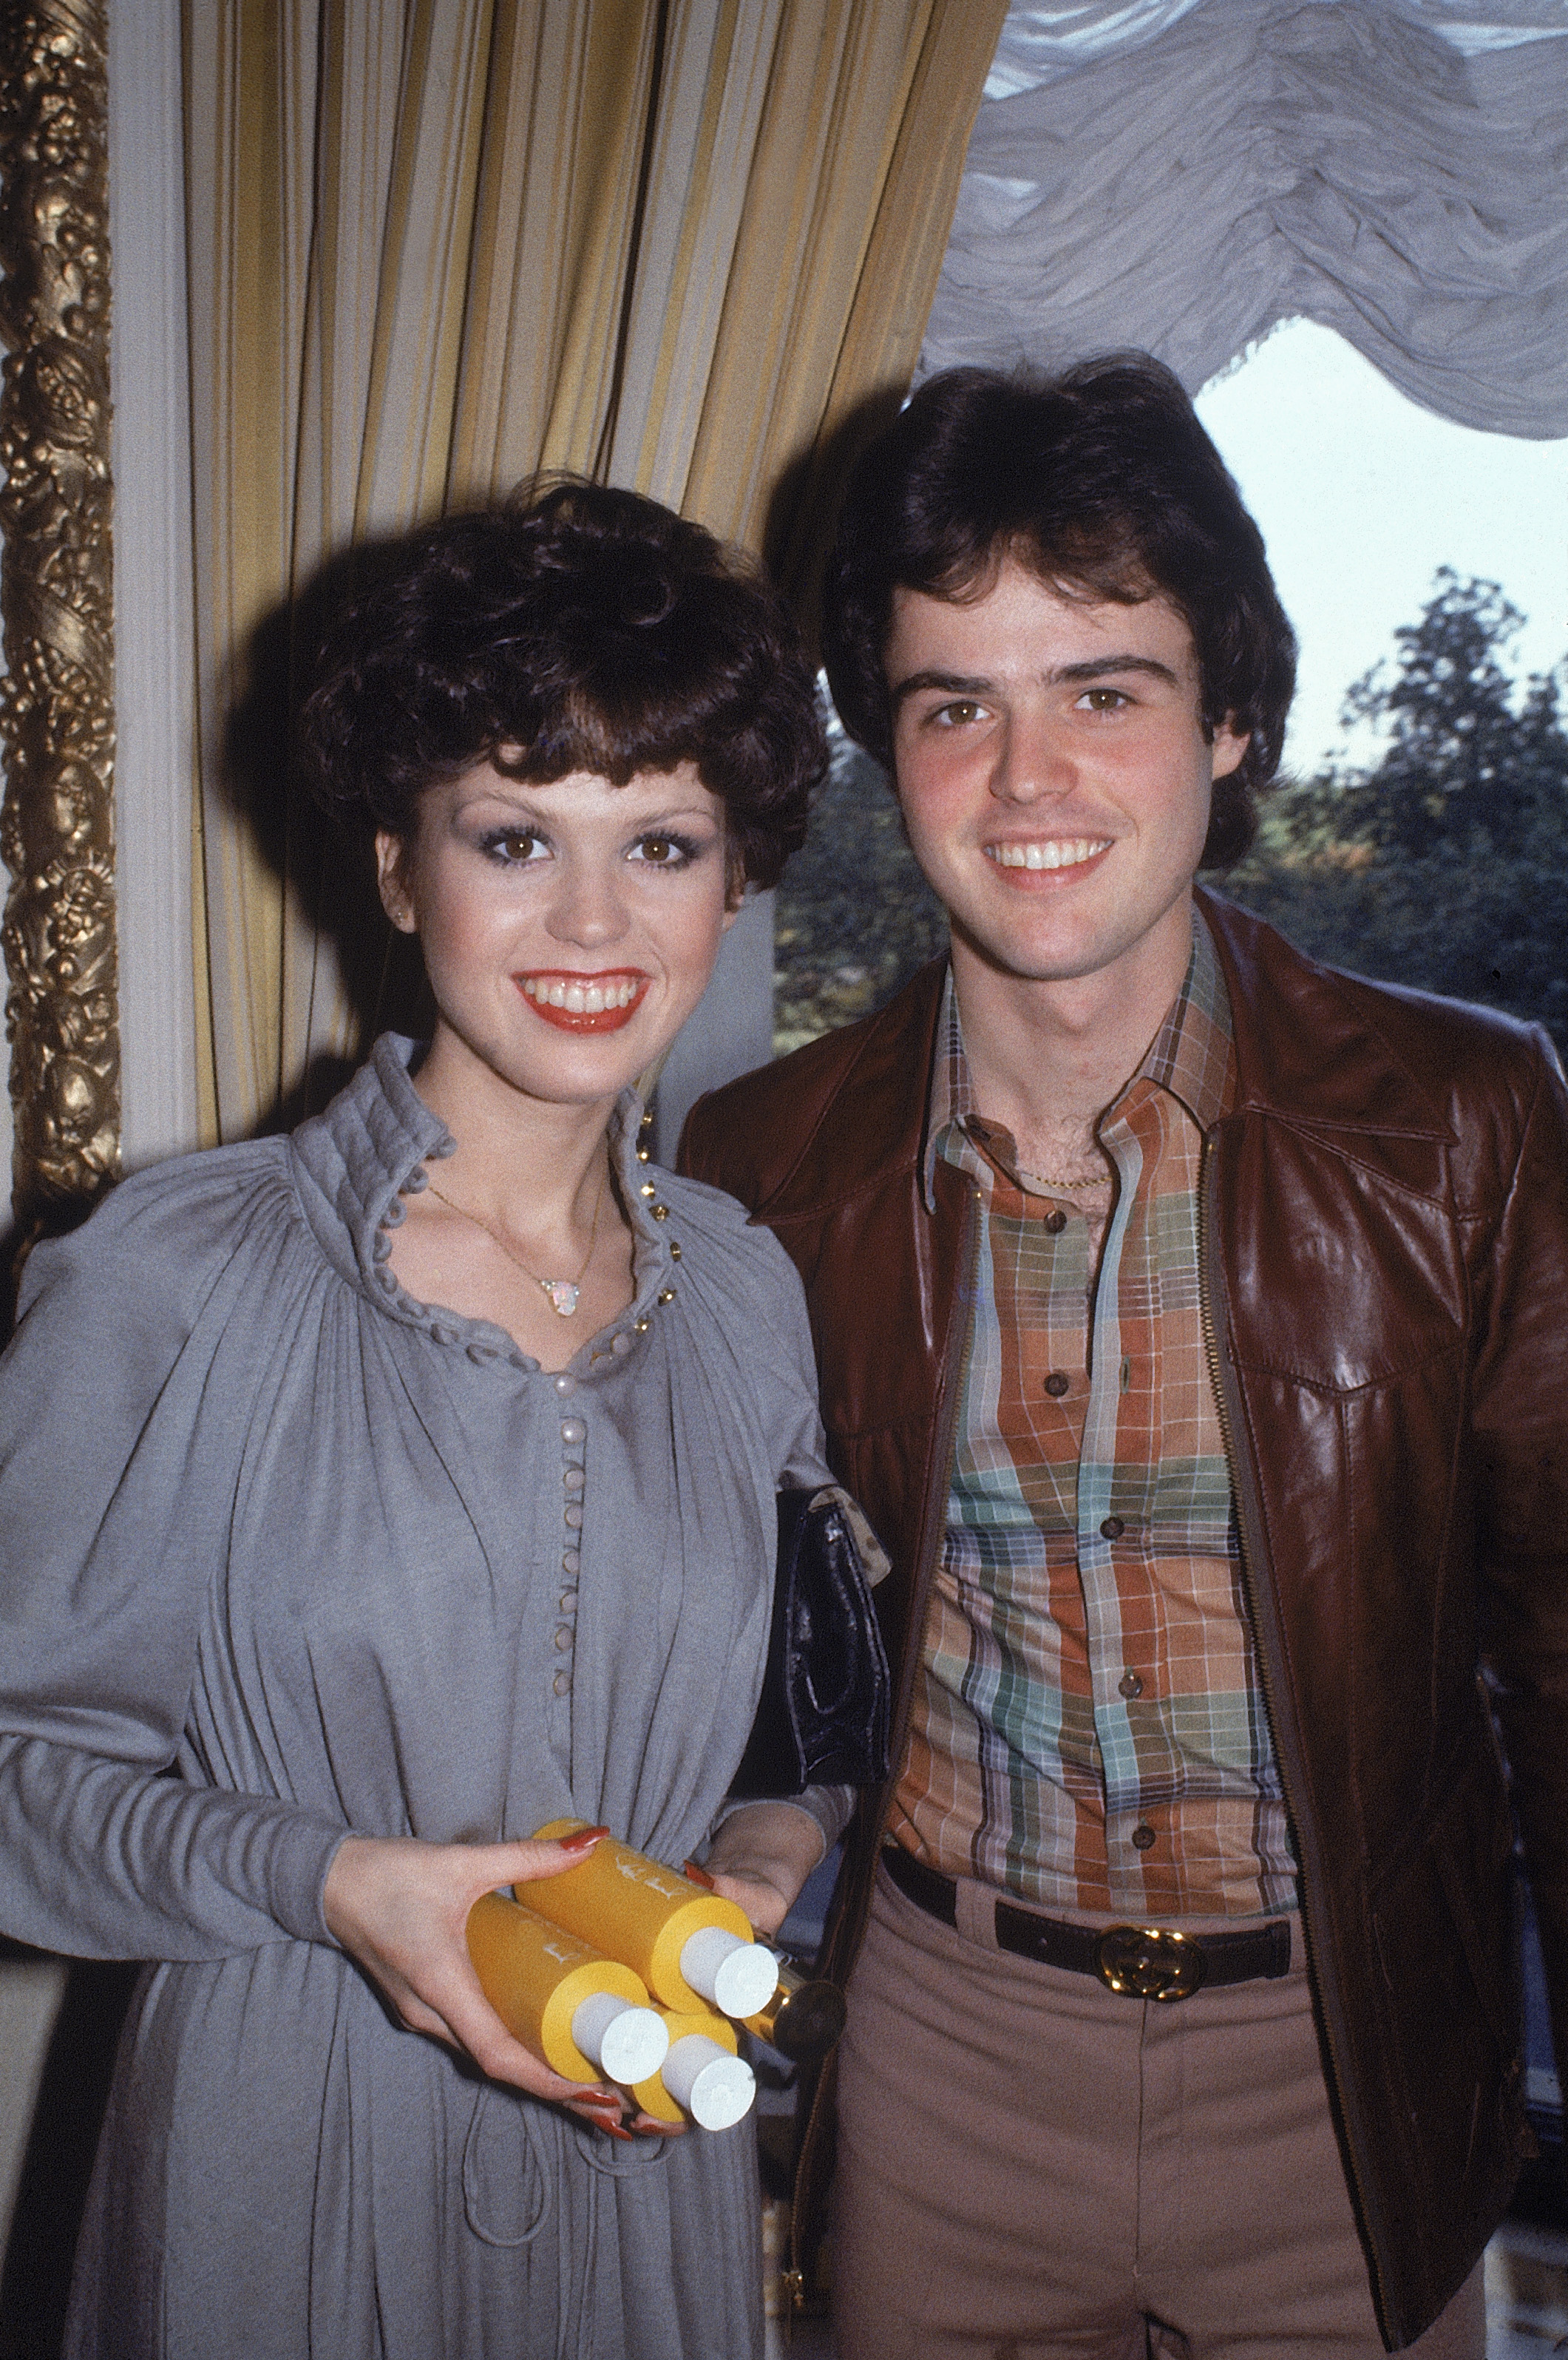 Marie Osmond and Donny Osmond in the 1980s | Source: Getty Images